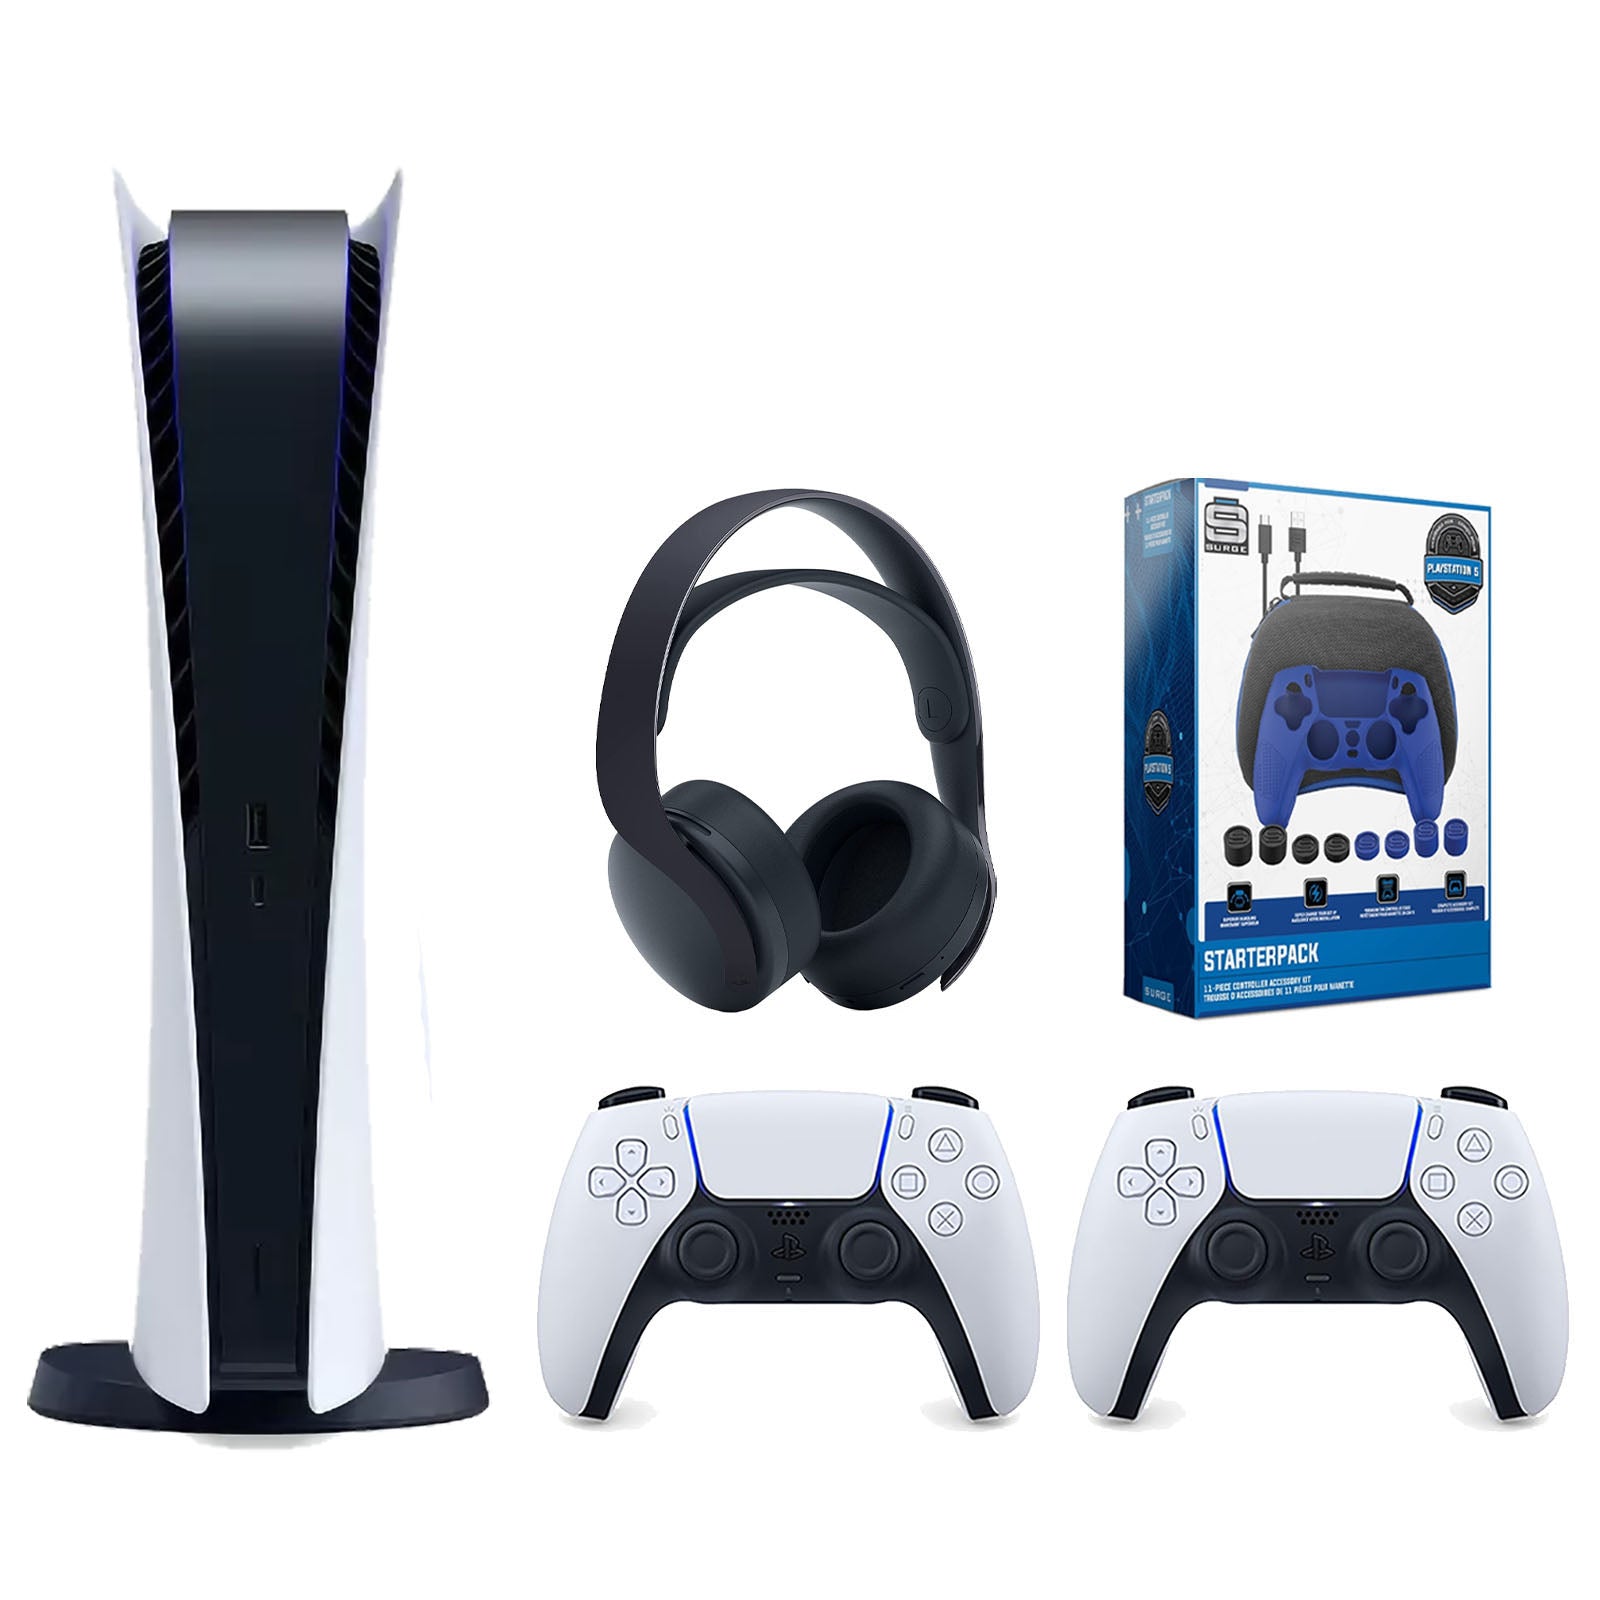 Sony Playstation 5 Digital Edition Console with Extra White Controller, Black PULSE 3D Headset and Surge Pro Gamer Starter Pack 11-Piece Accessory Bundle - Pro-Distributing